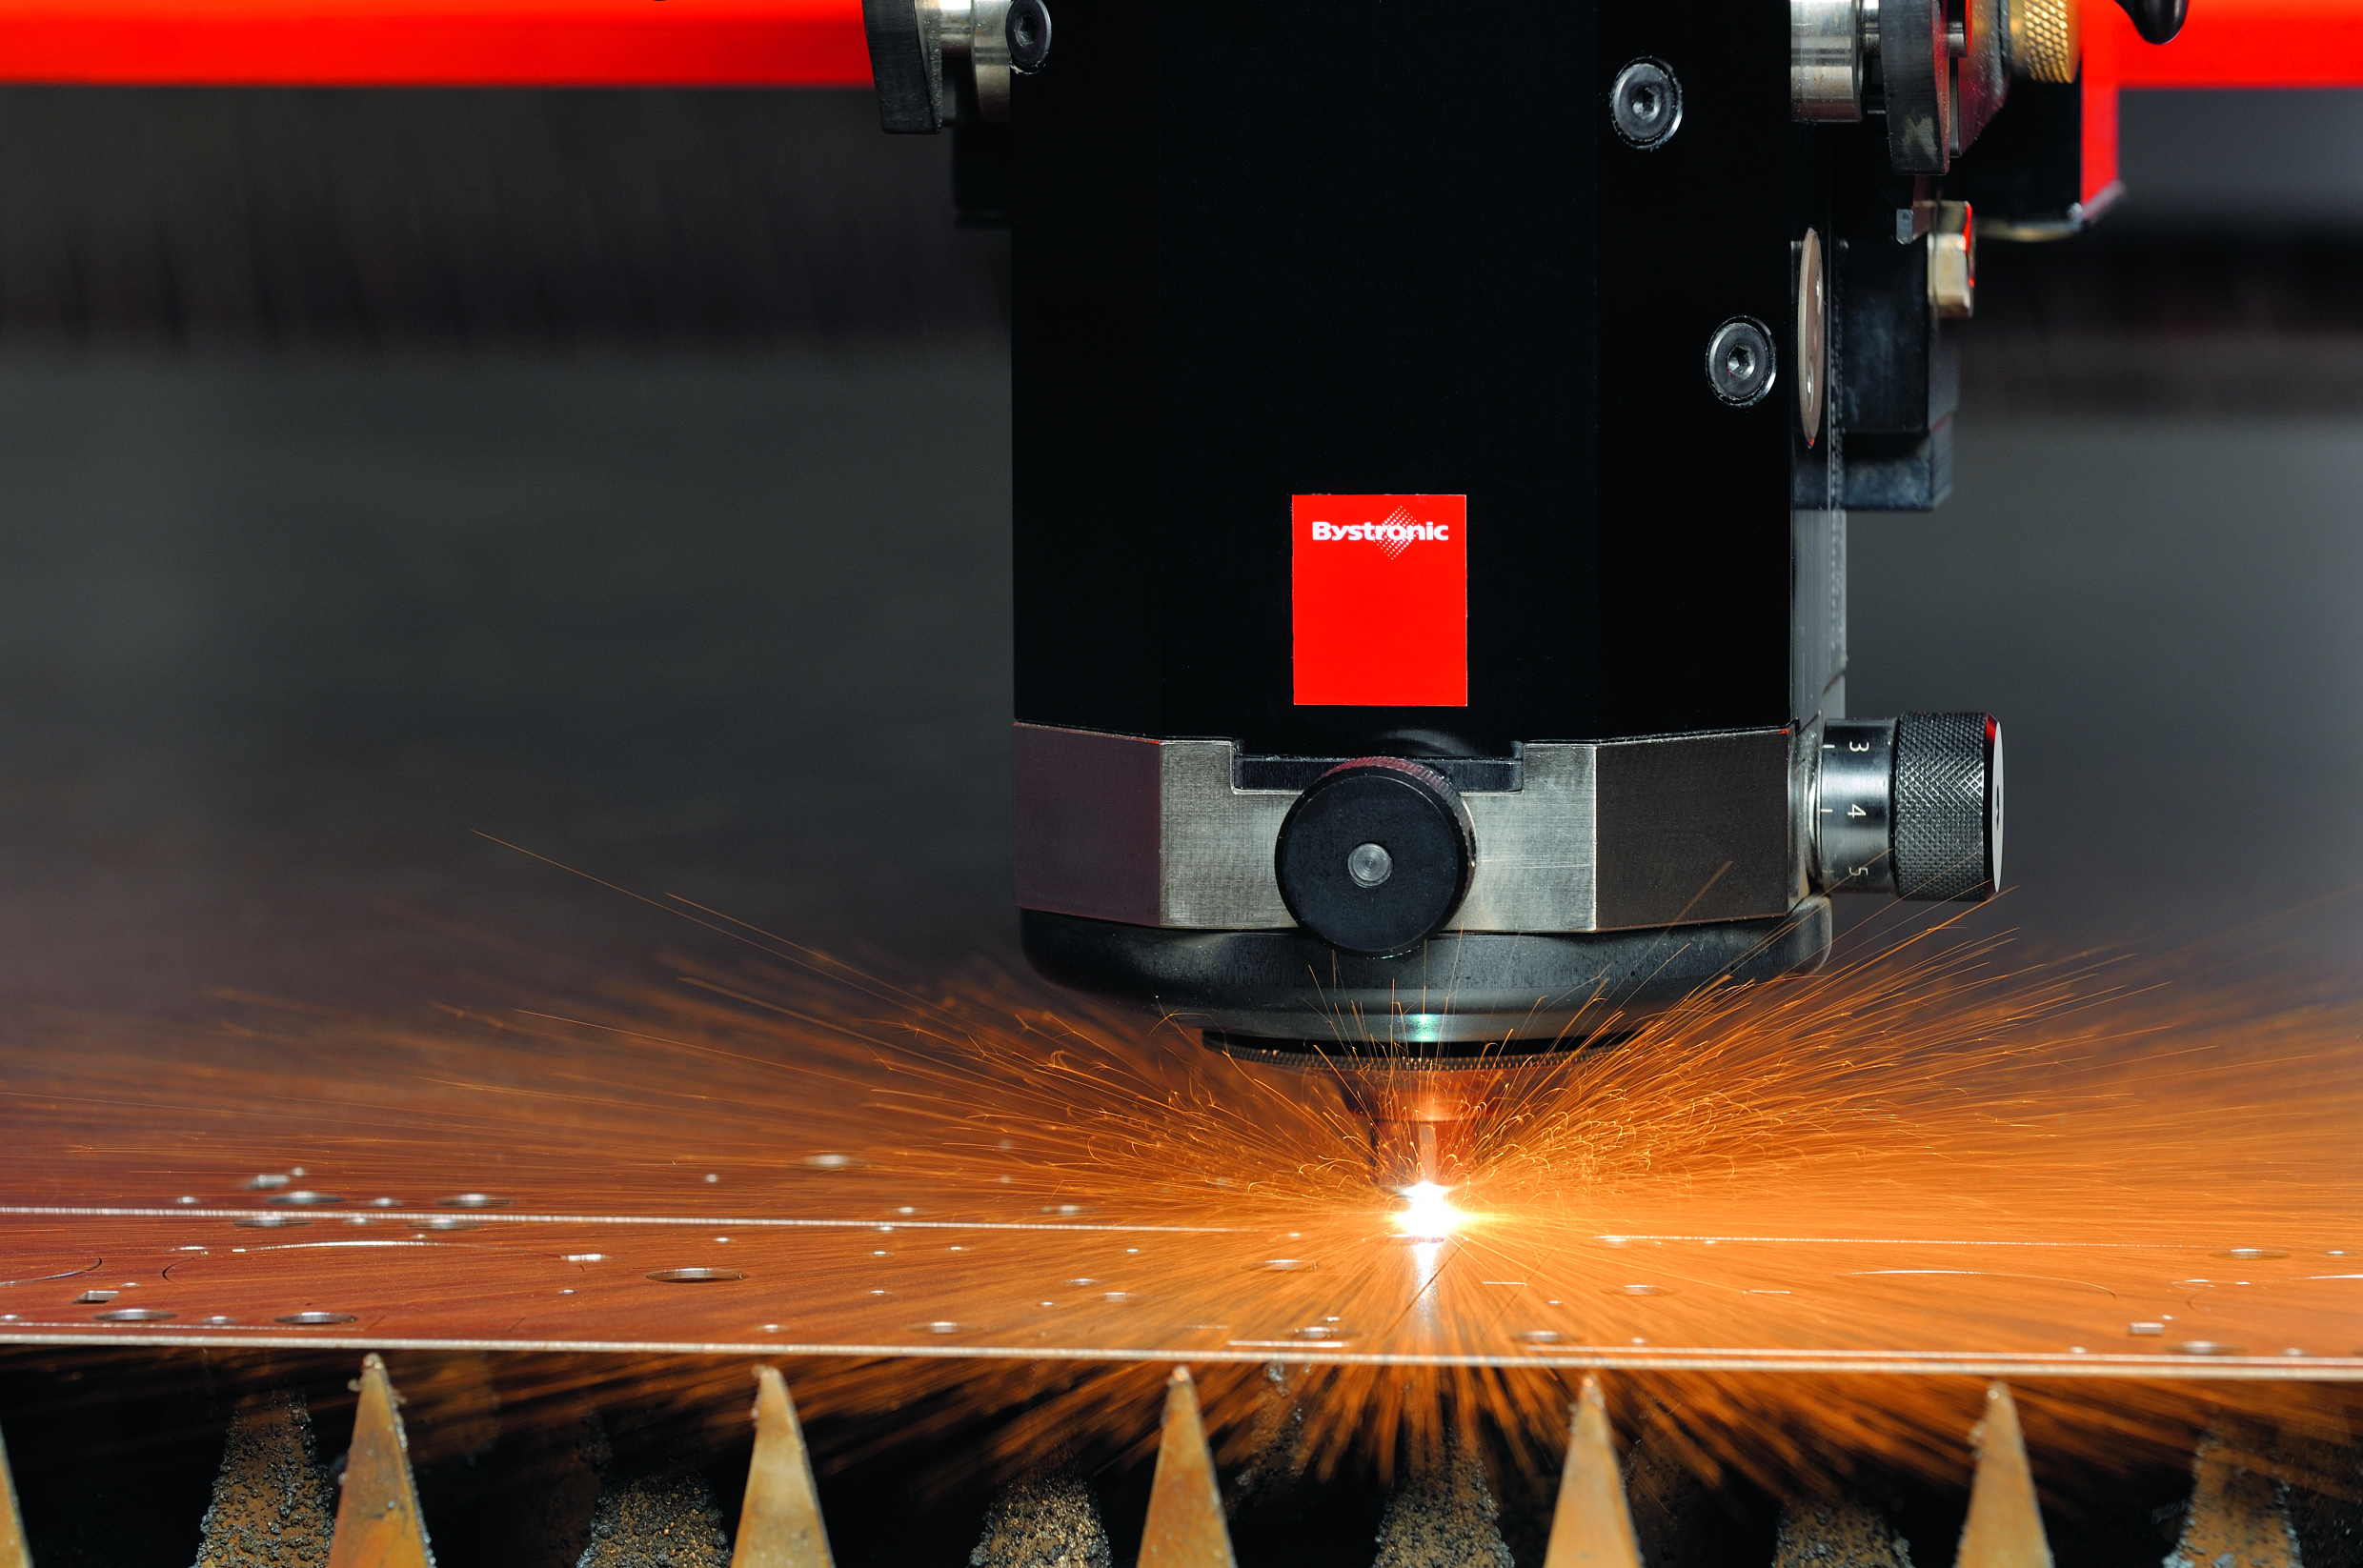 Benefits of outsourcing laser cutting